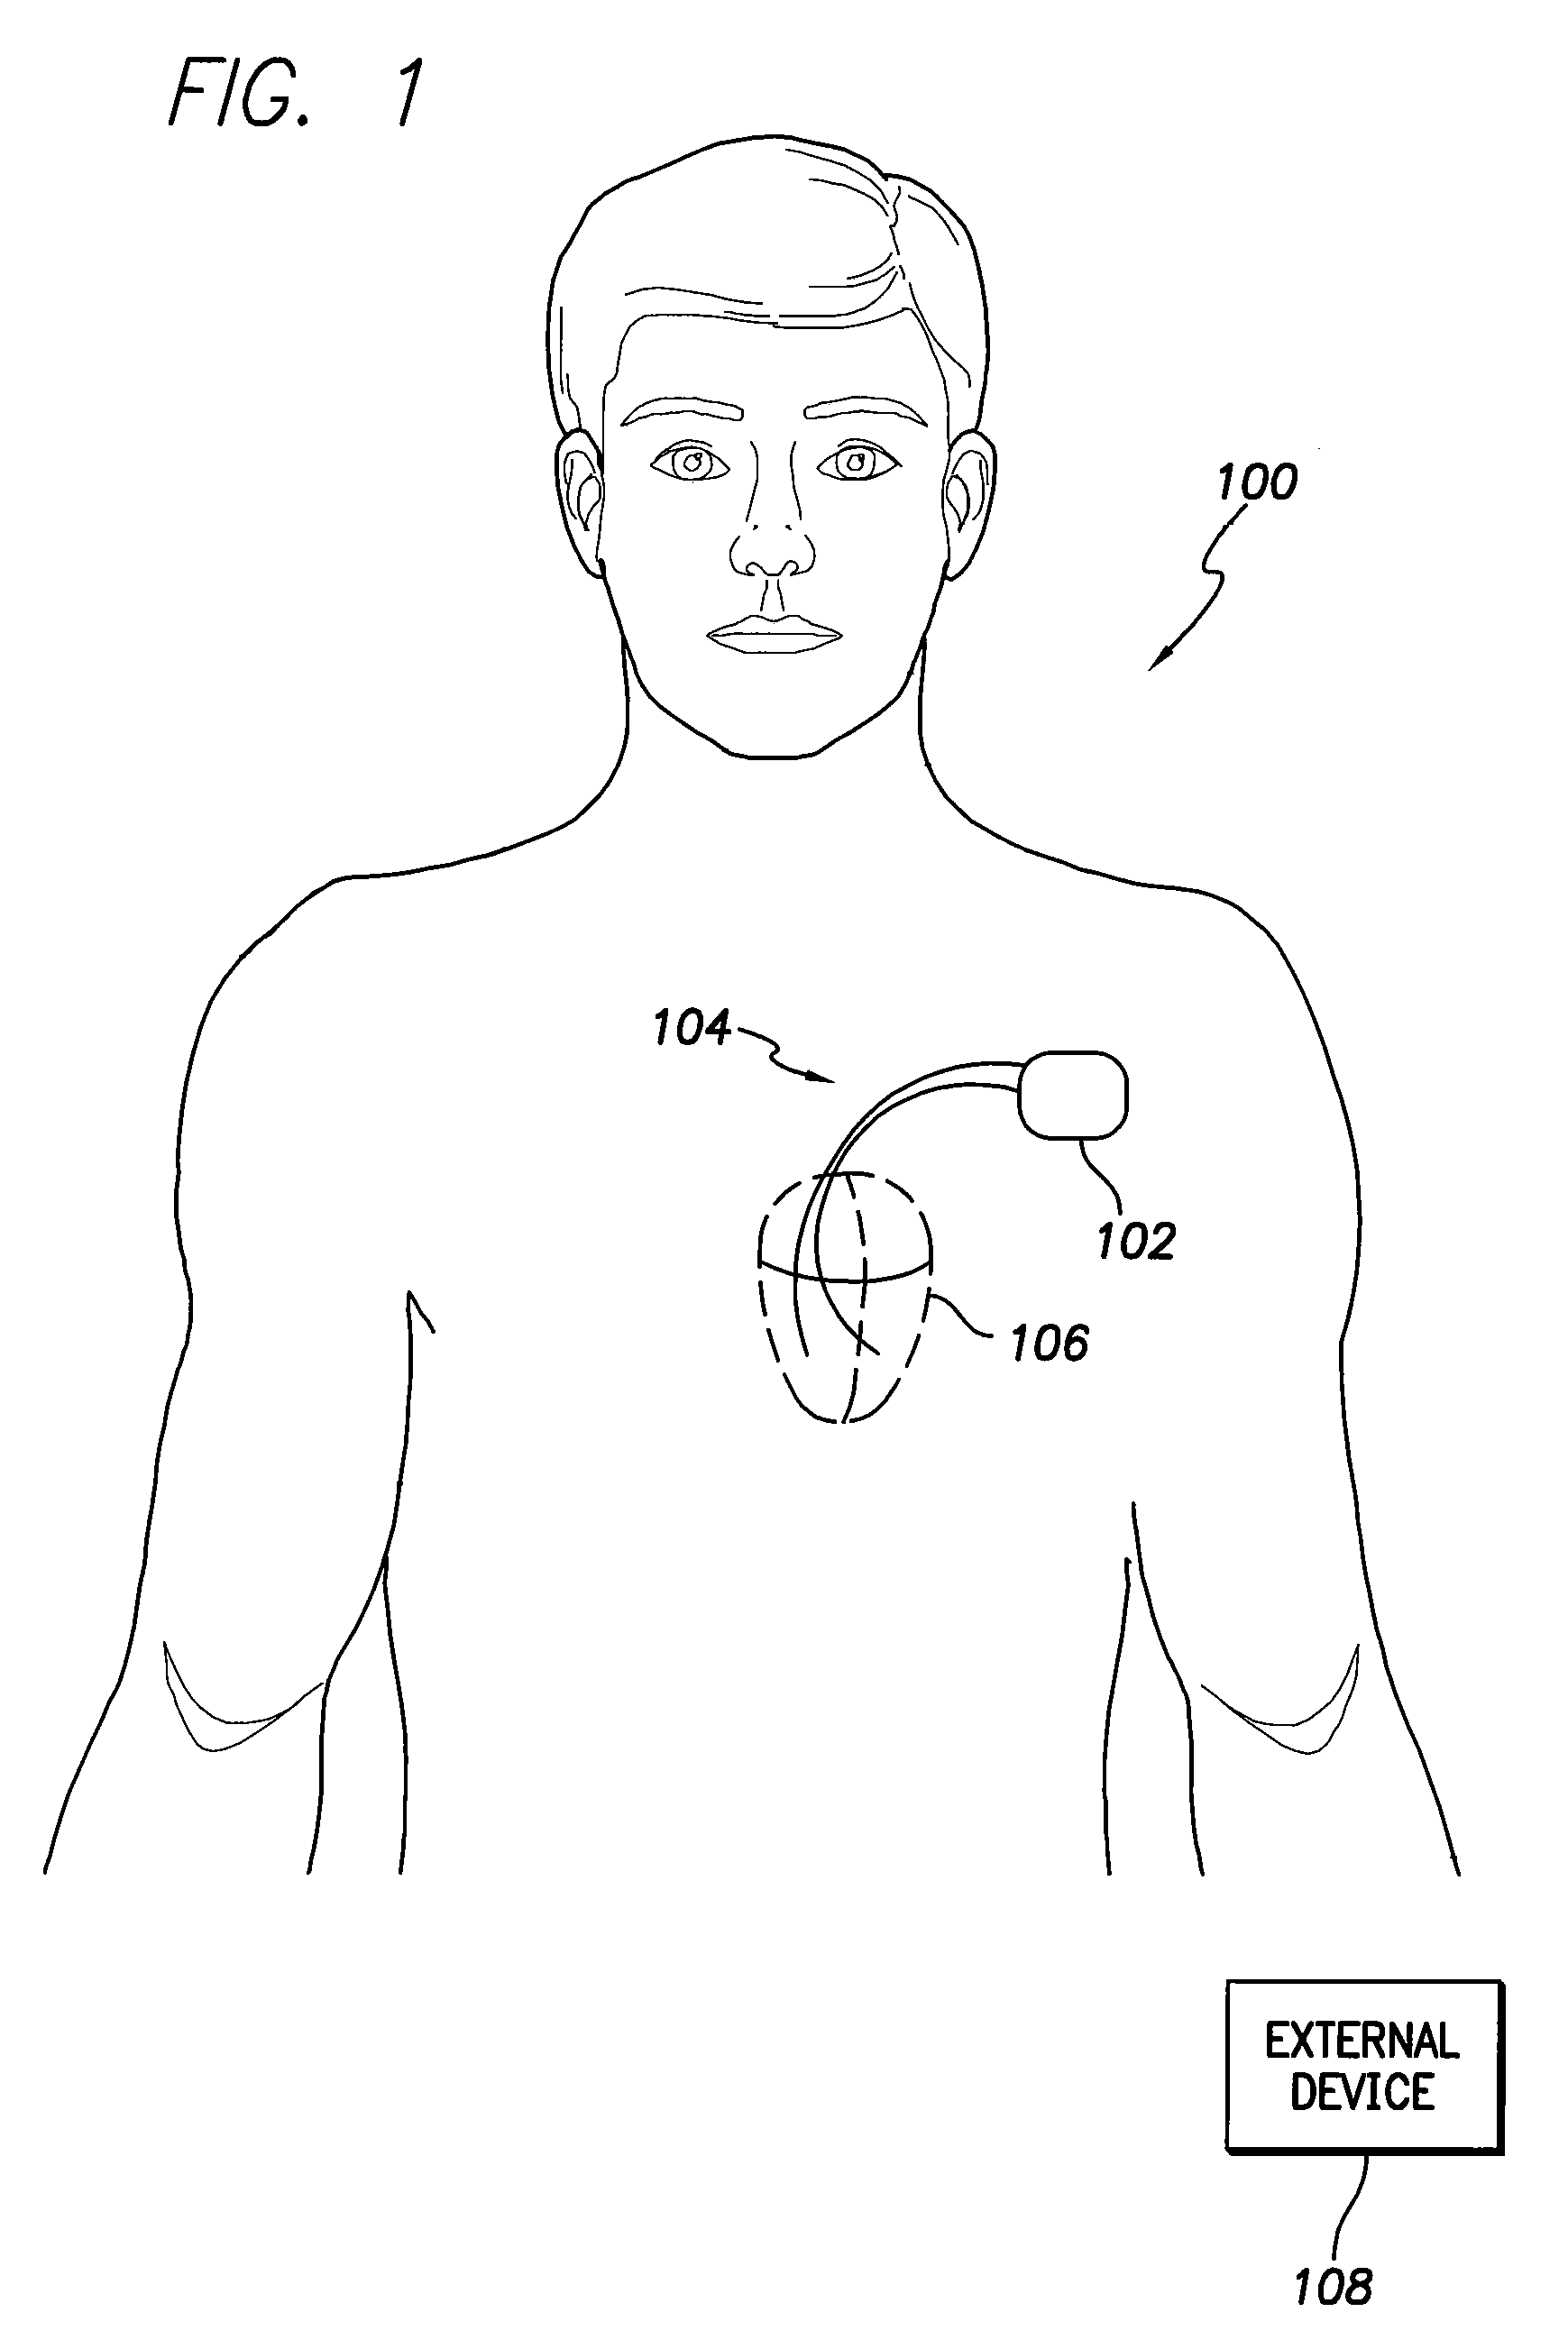 System and method for identifying a potential cause of pulmonary edema